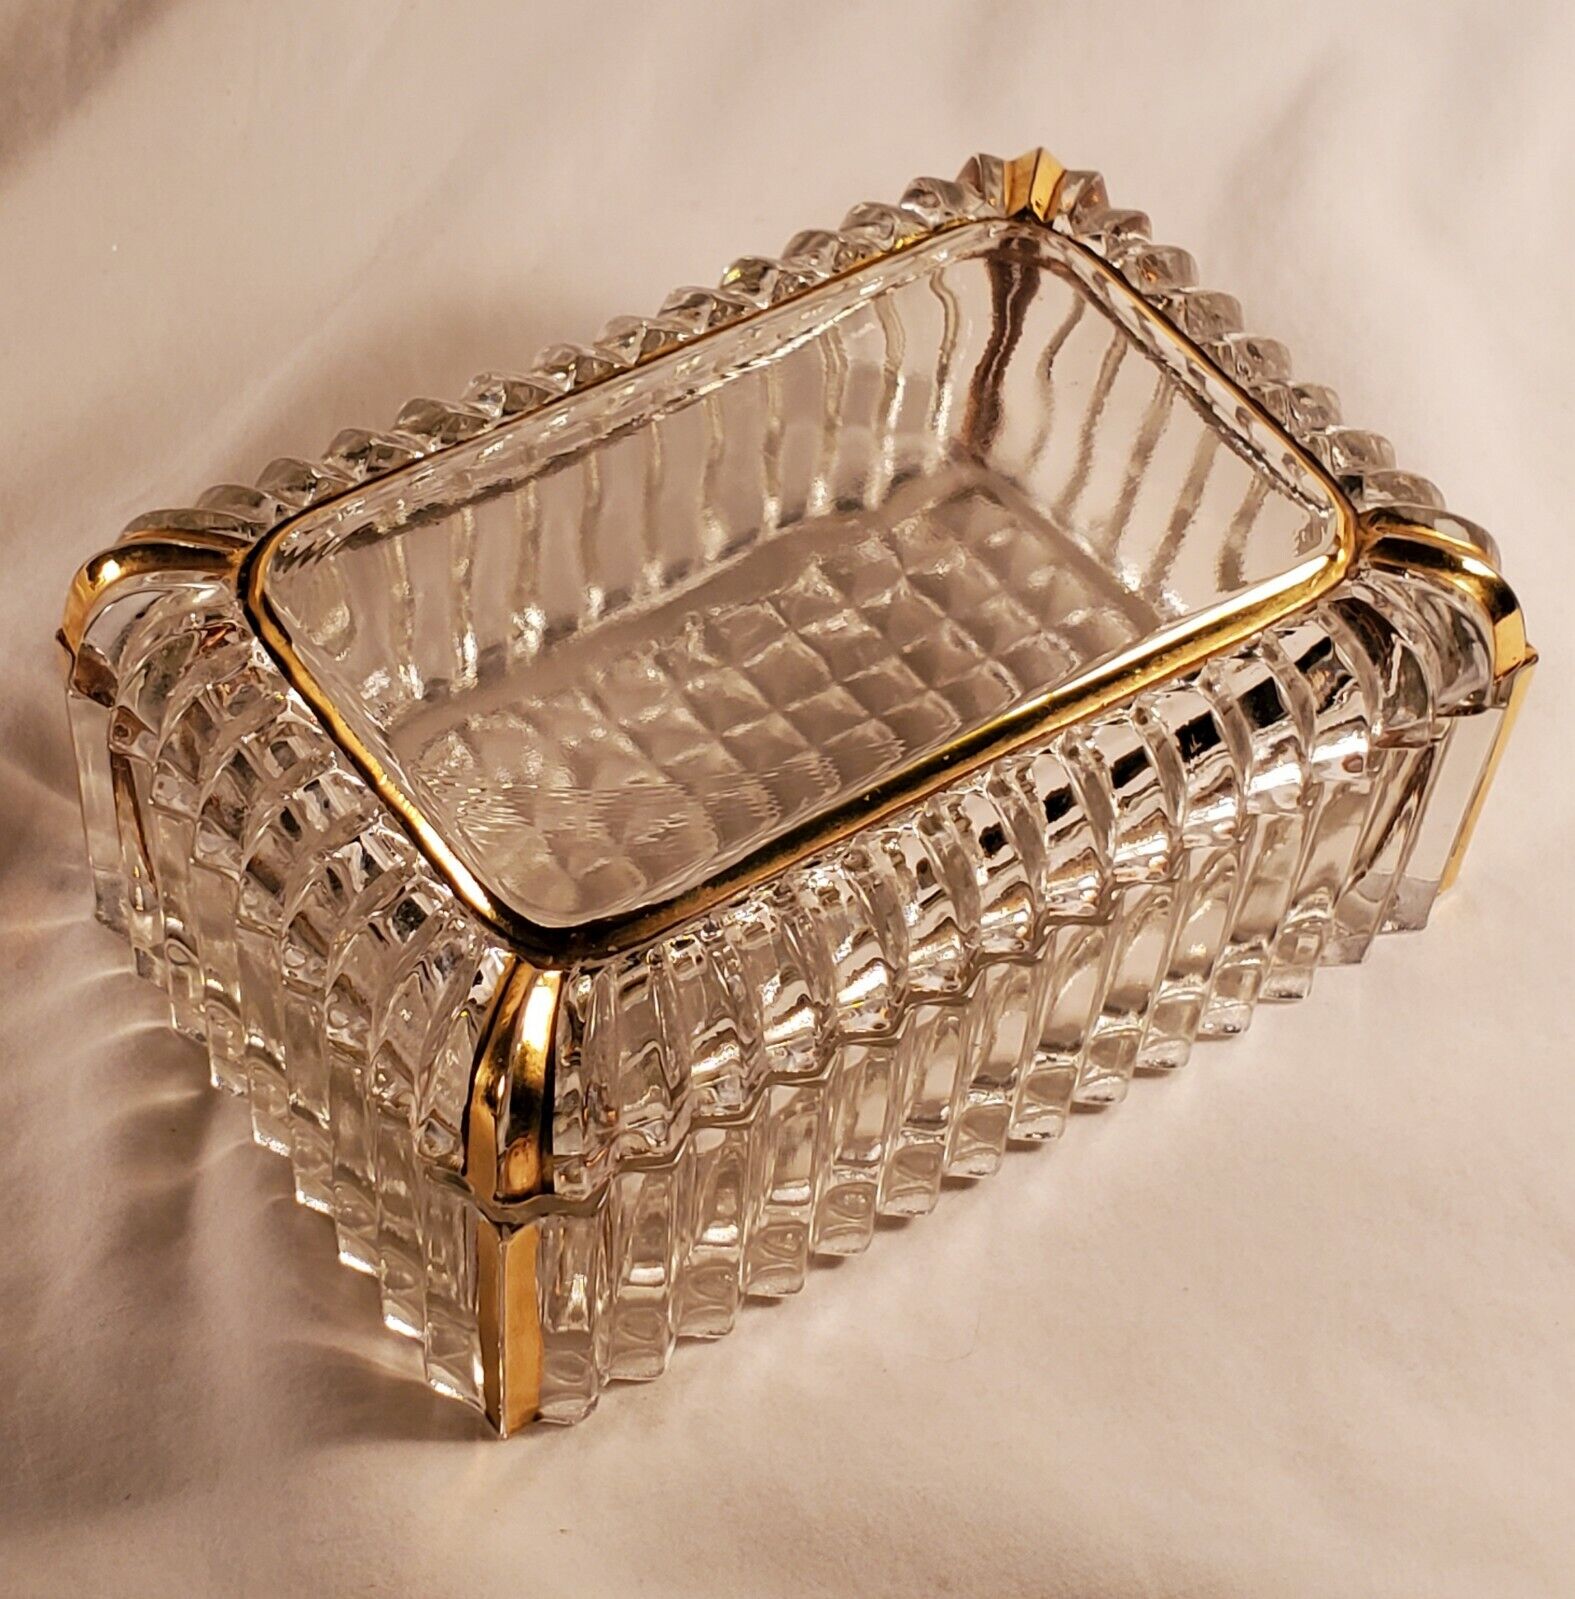 Classy Art Deco Style Trinket Box, Angled Cuts, Golden Touches Very Beautiful